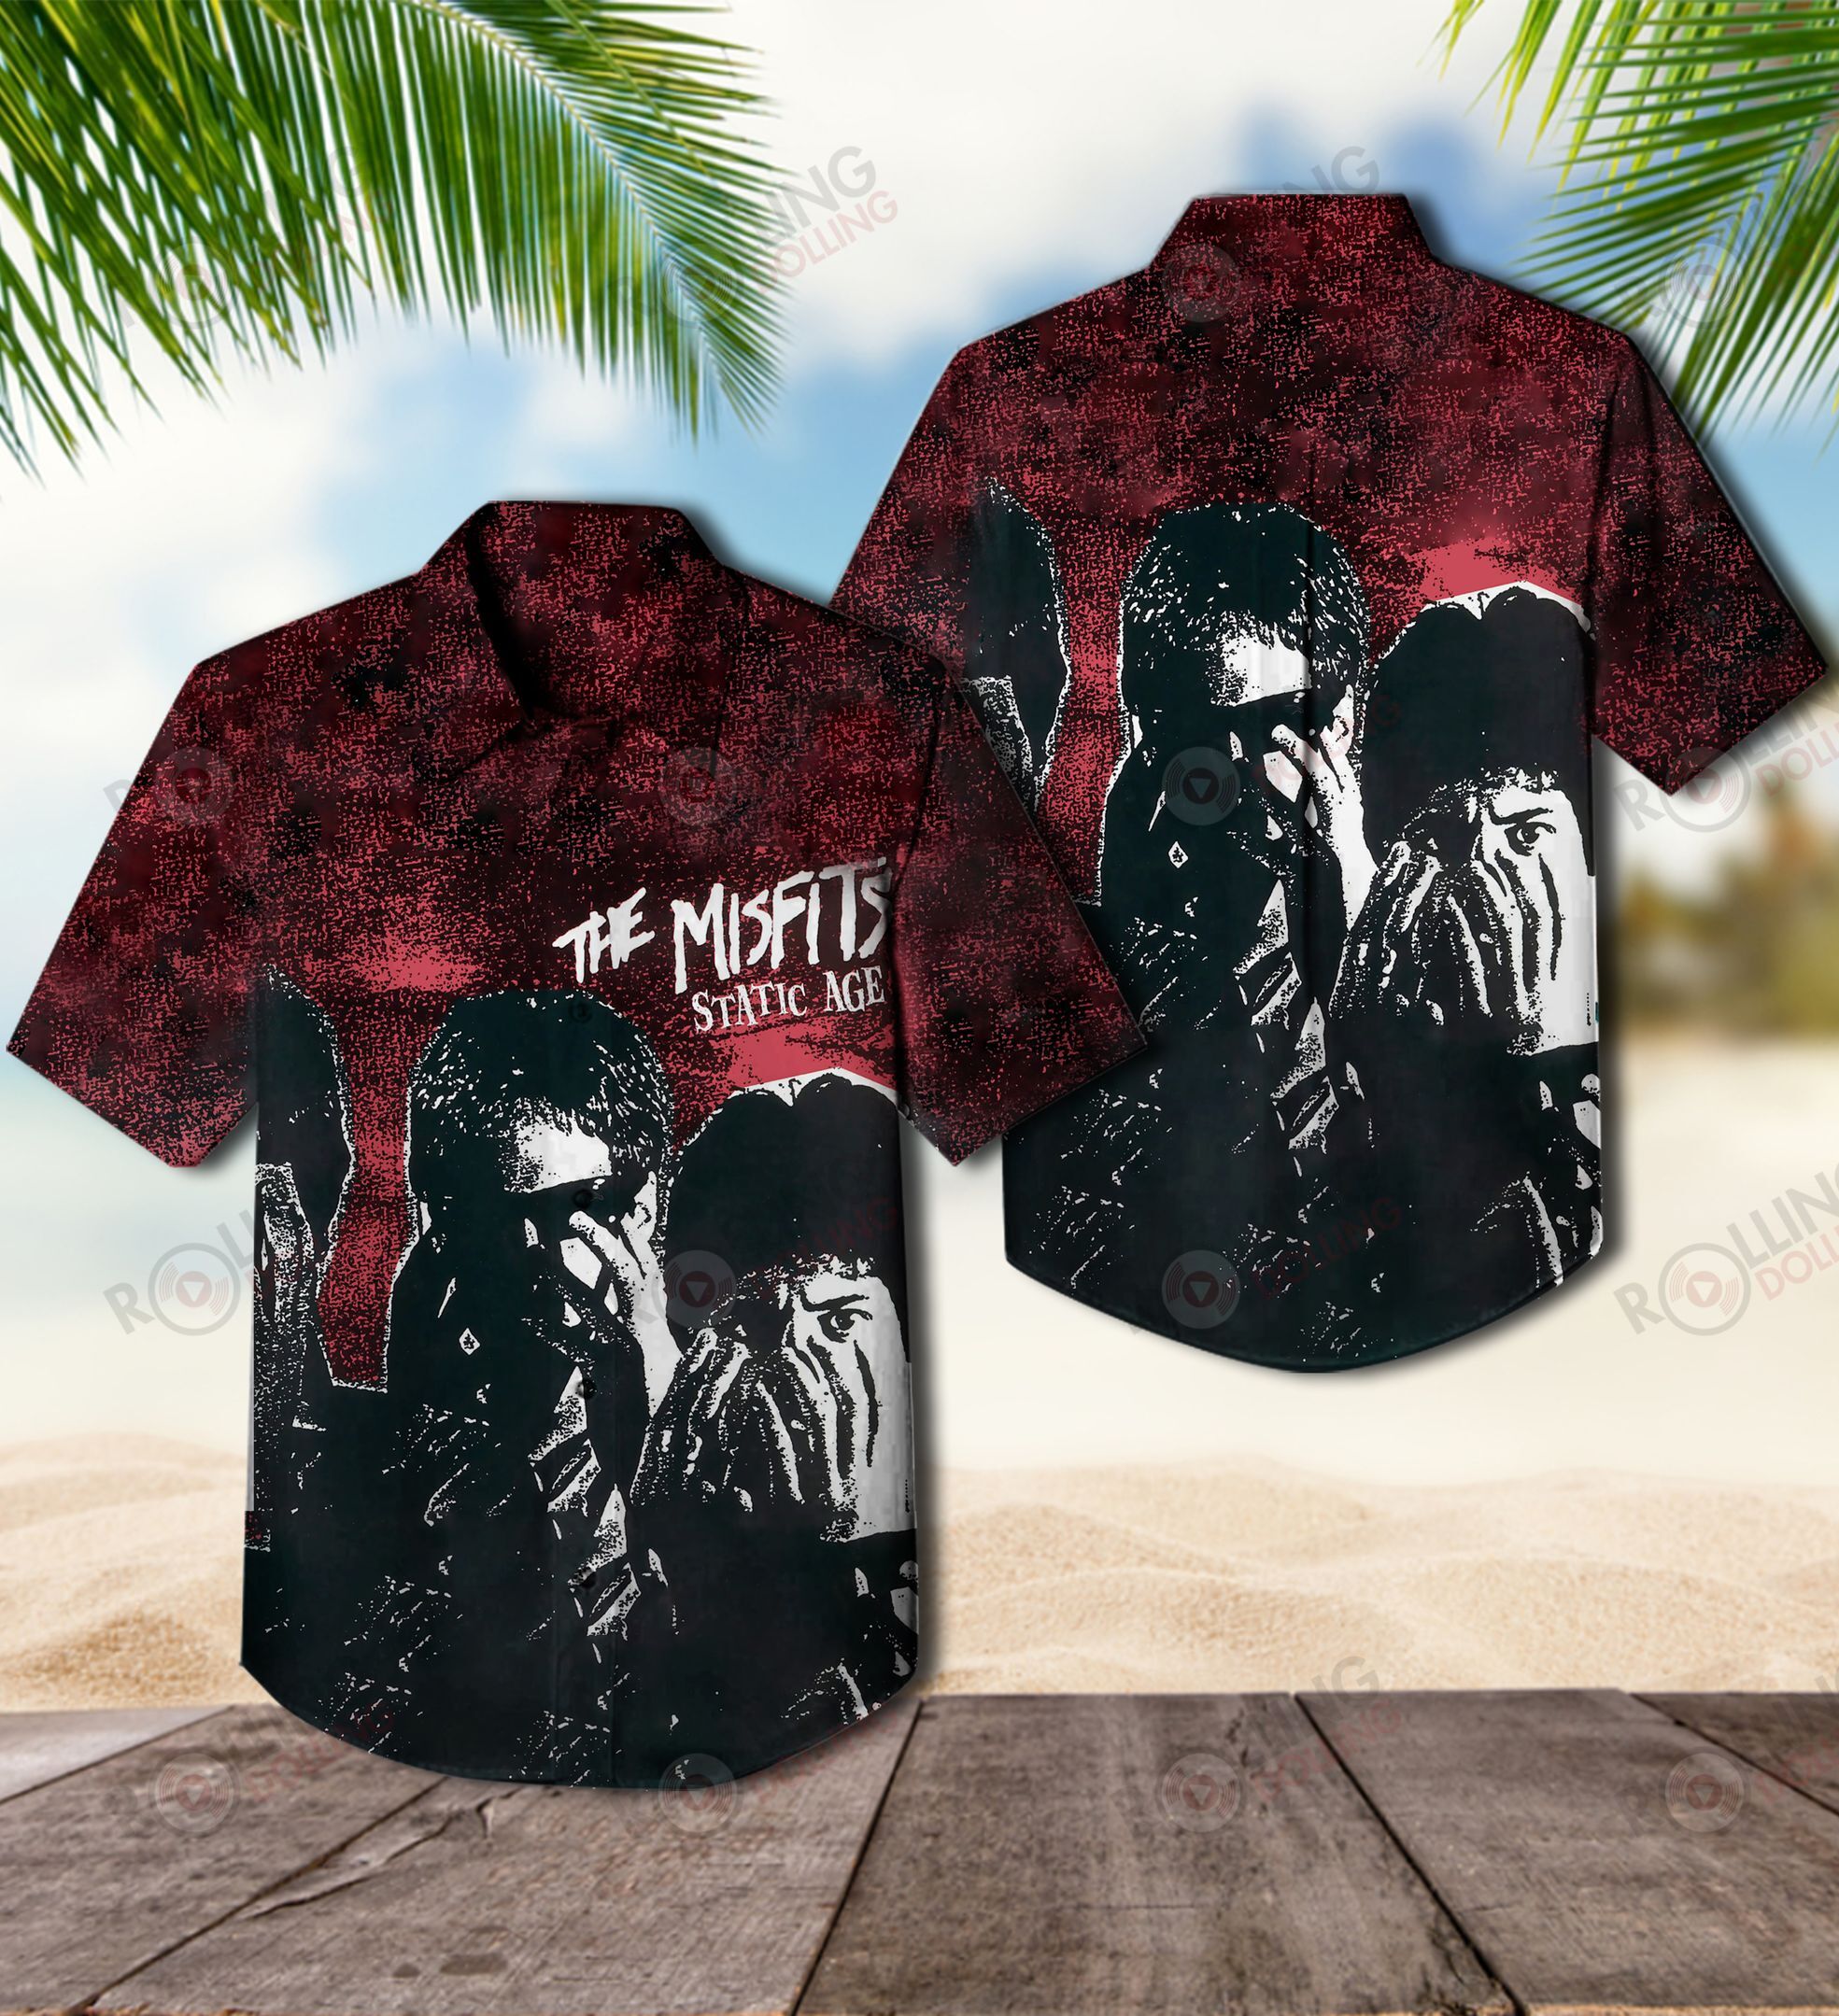 The Hawaiian Shirt is a popular shirt that is worn by Rock band fans 33